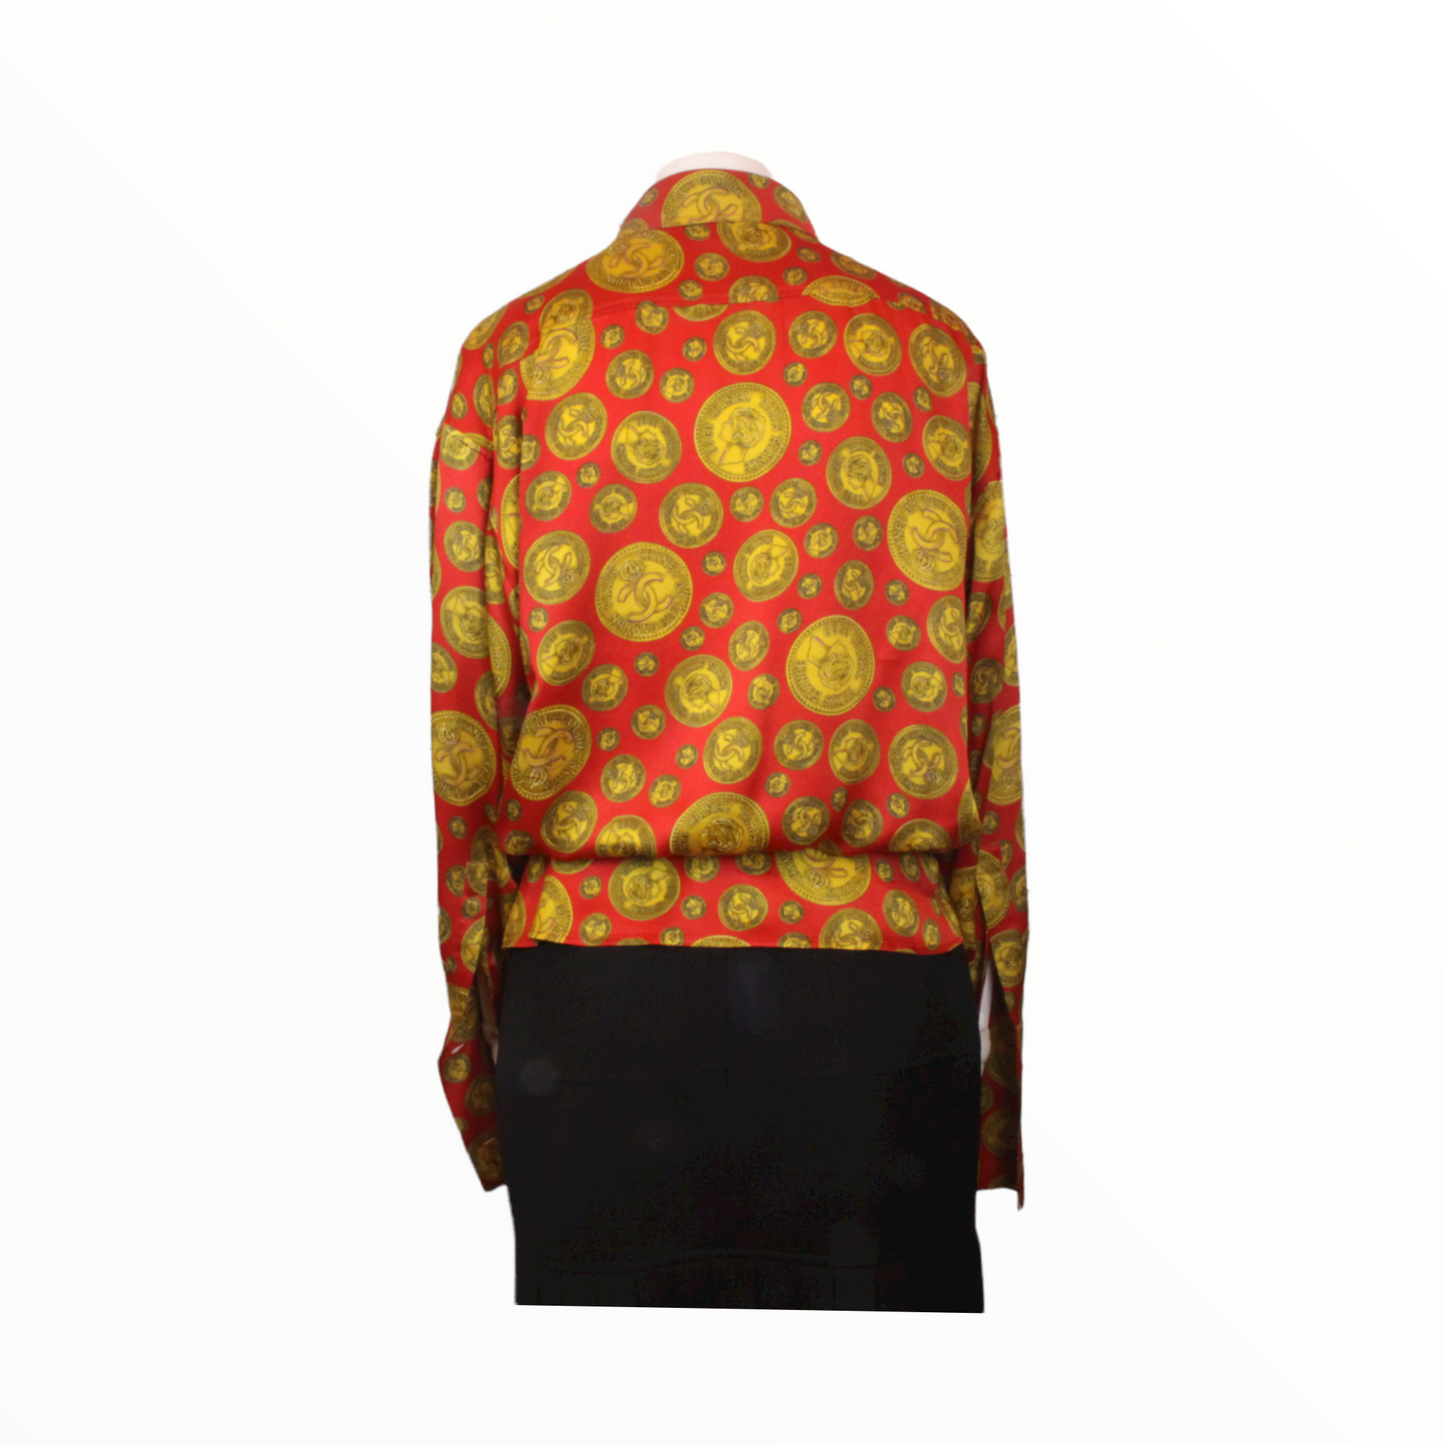 Chanel red blouse with coin Chanel motif - M - 1990s